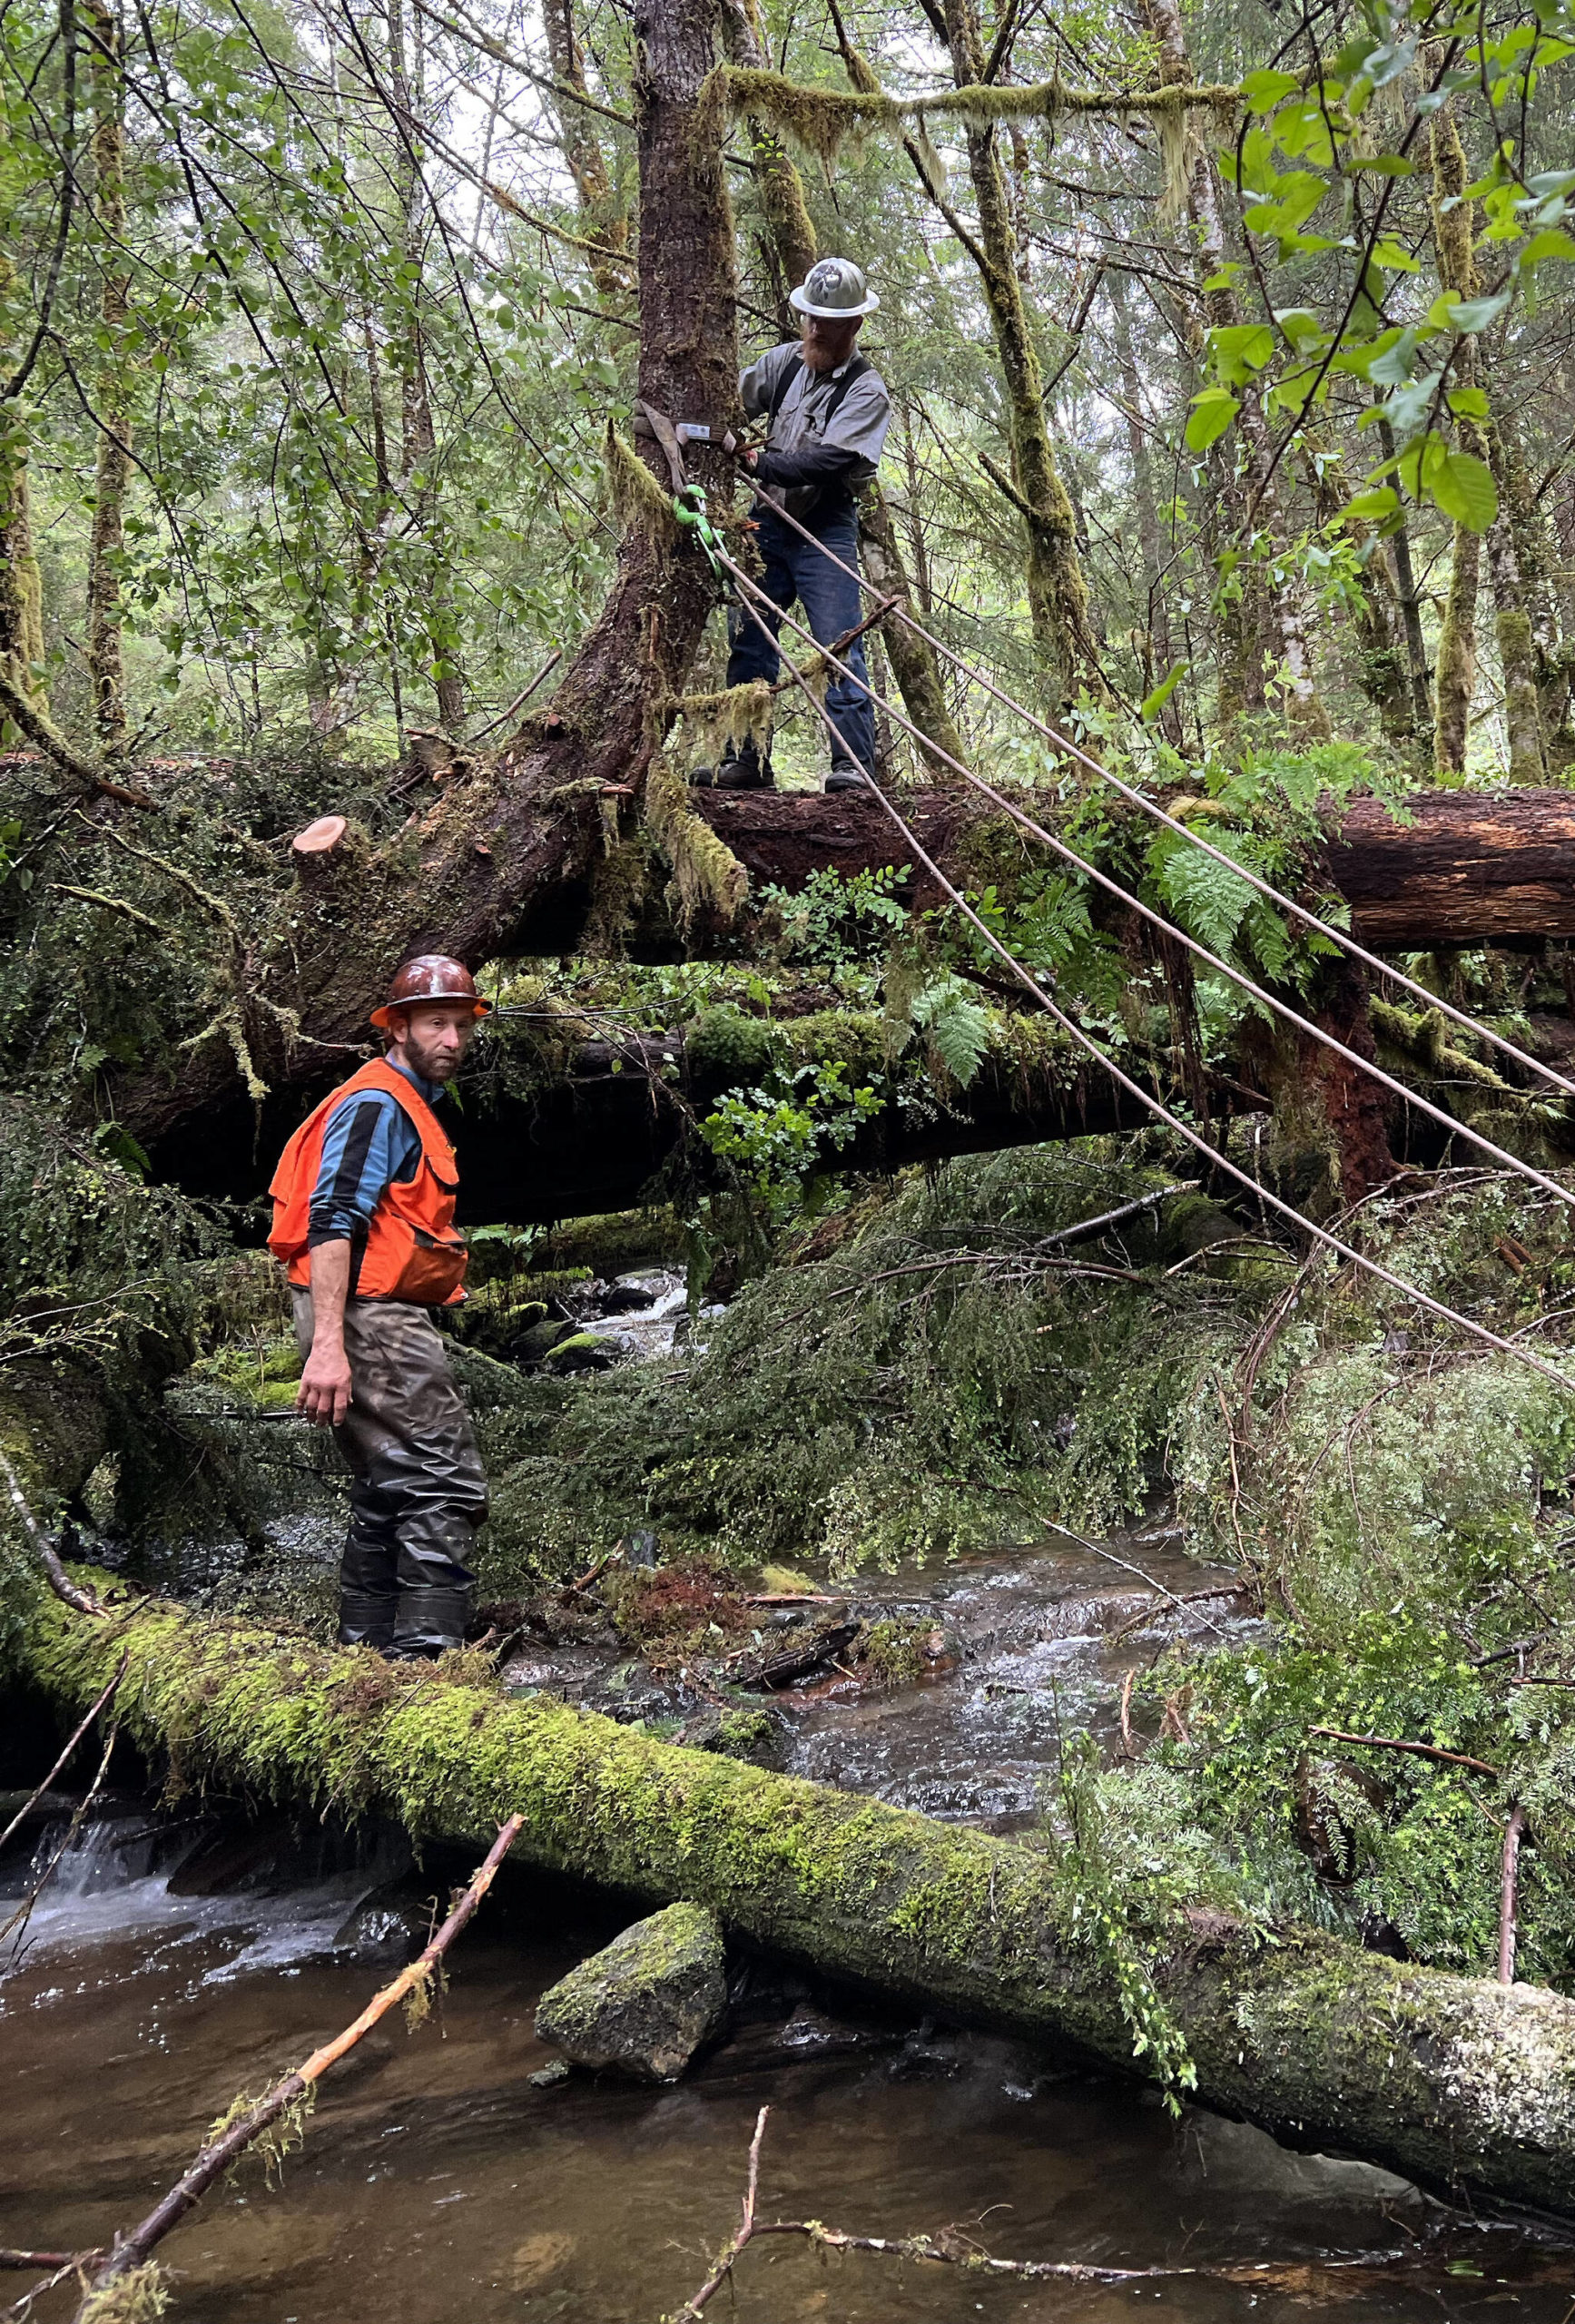 Rob Cadmus, Executive Director of the Southeast Alaska Watershed Coalition, and Quinn Aboudara of the Klawock Indigenous Stewards Forest Partnership work together on restoring fish habitat at Seven Mile Creek just outside Klawock Lake.